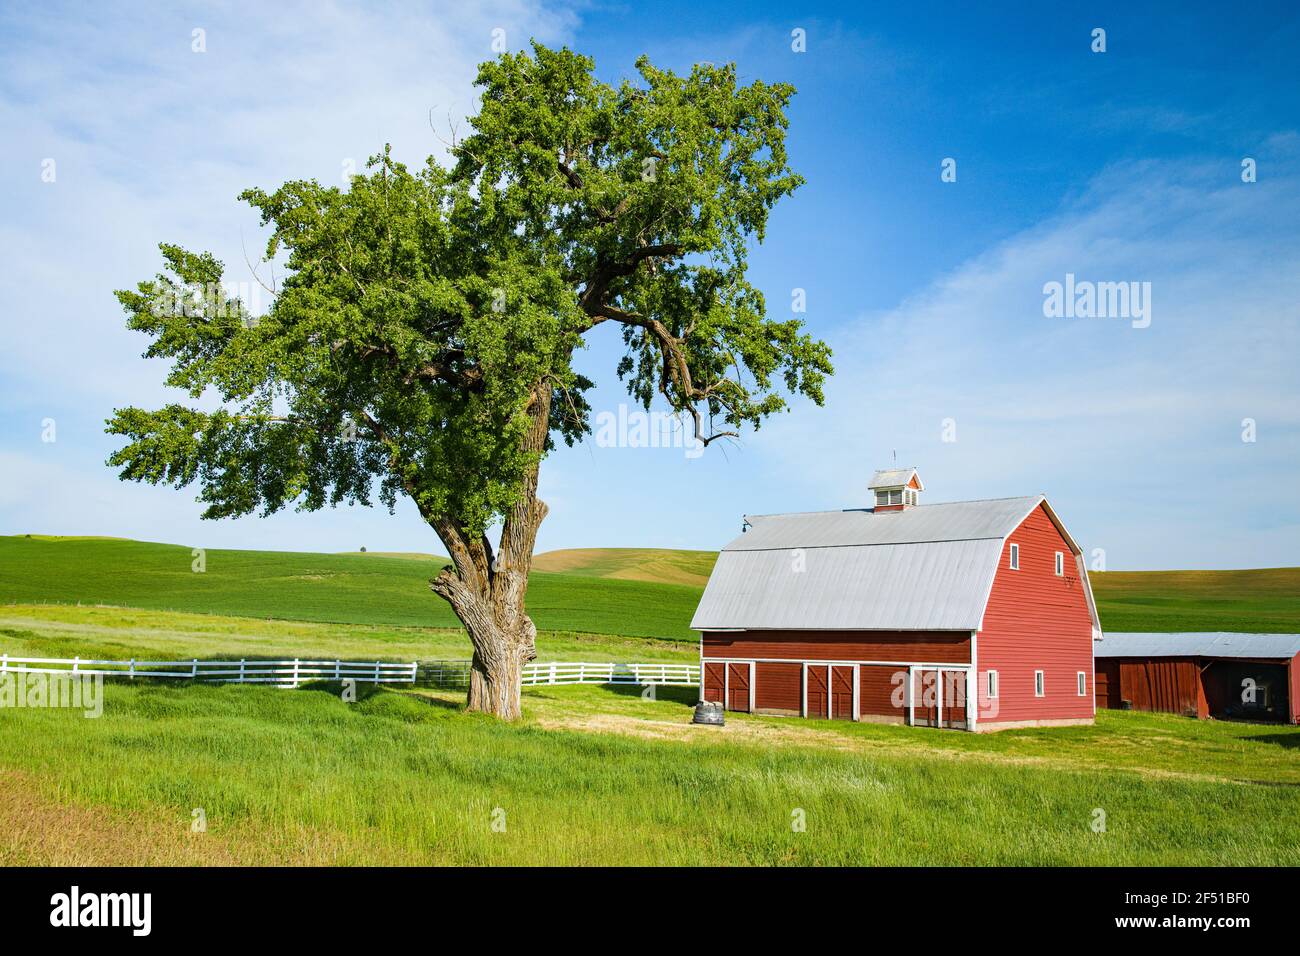 Traditional countryside scene of red barn and mature tree in the Palouse Region of Washington State in North America under a prefect pale blue sky Stock Photo